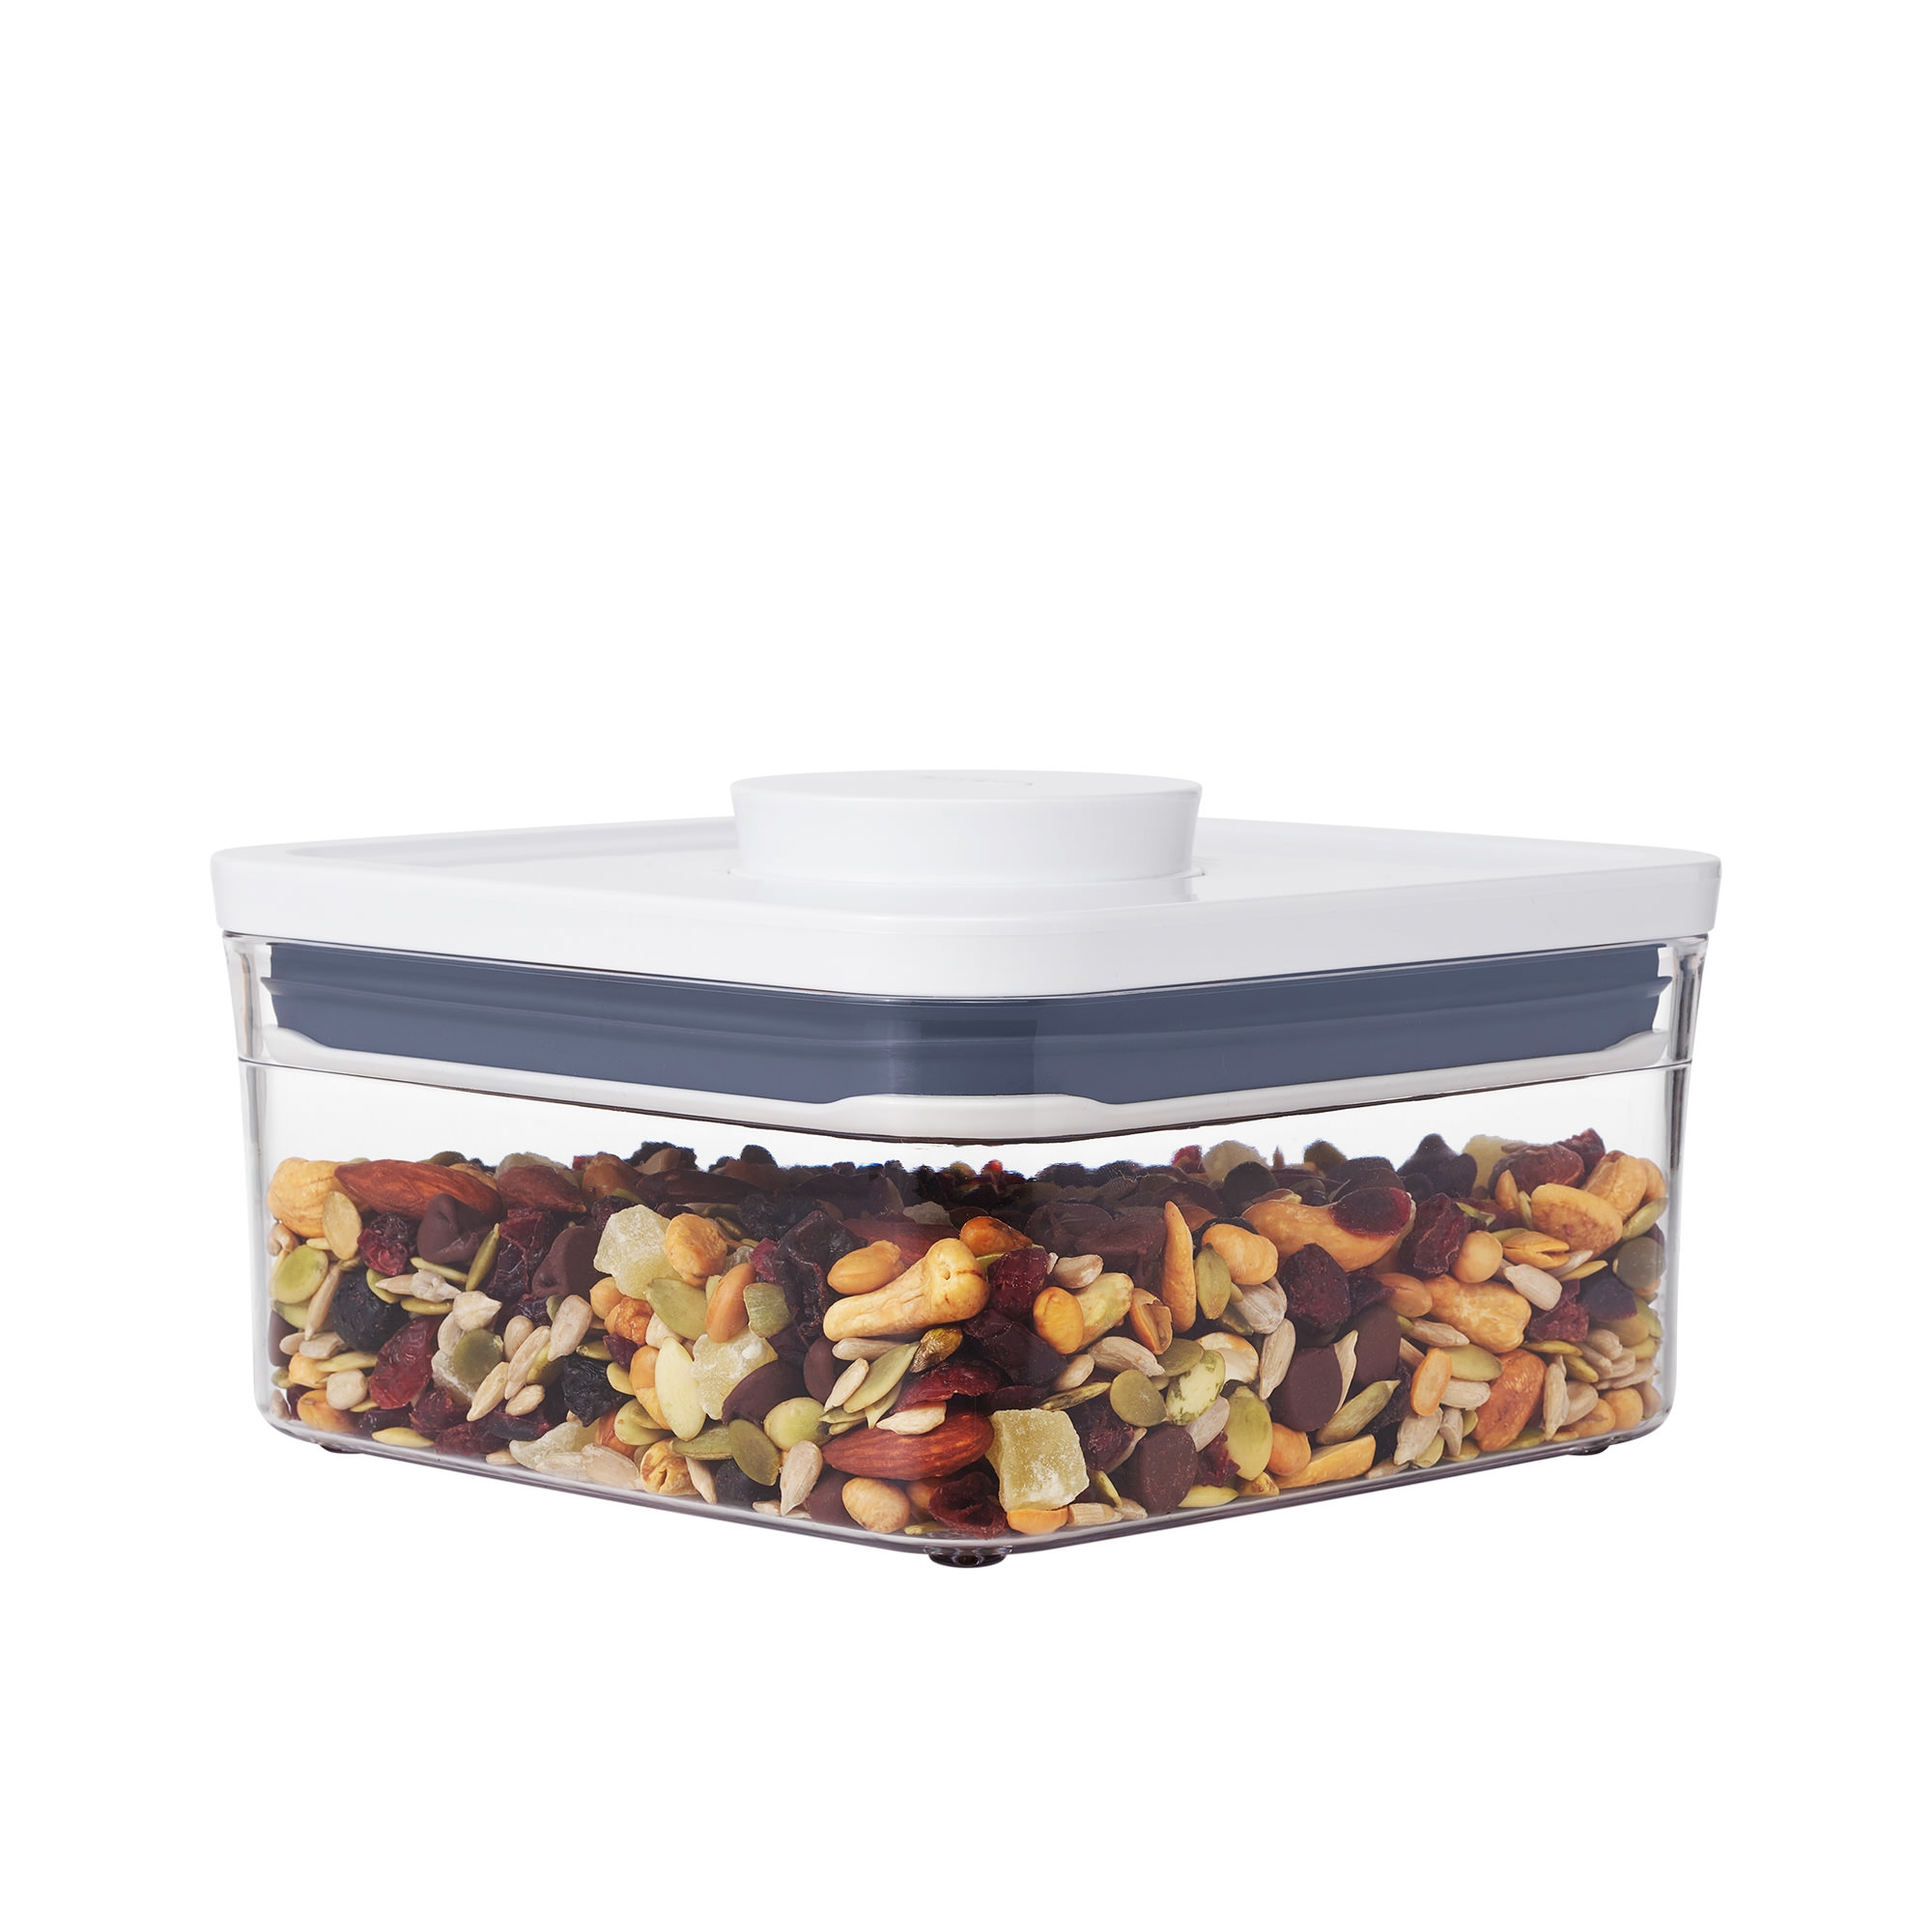 OXO Good Grips Square Pop 2.0 Mini Container 1L Image 1